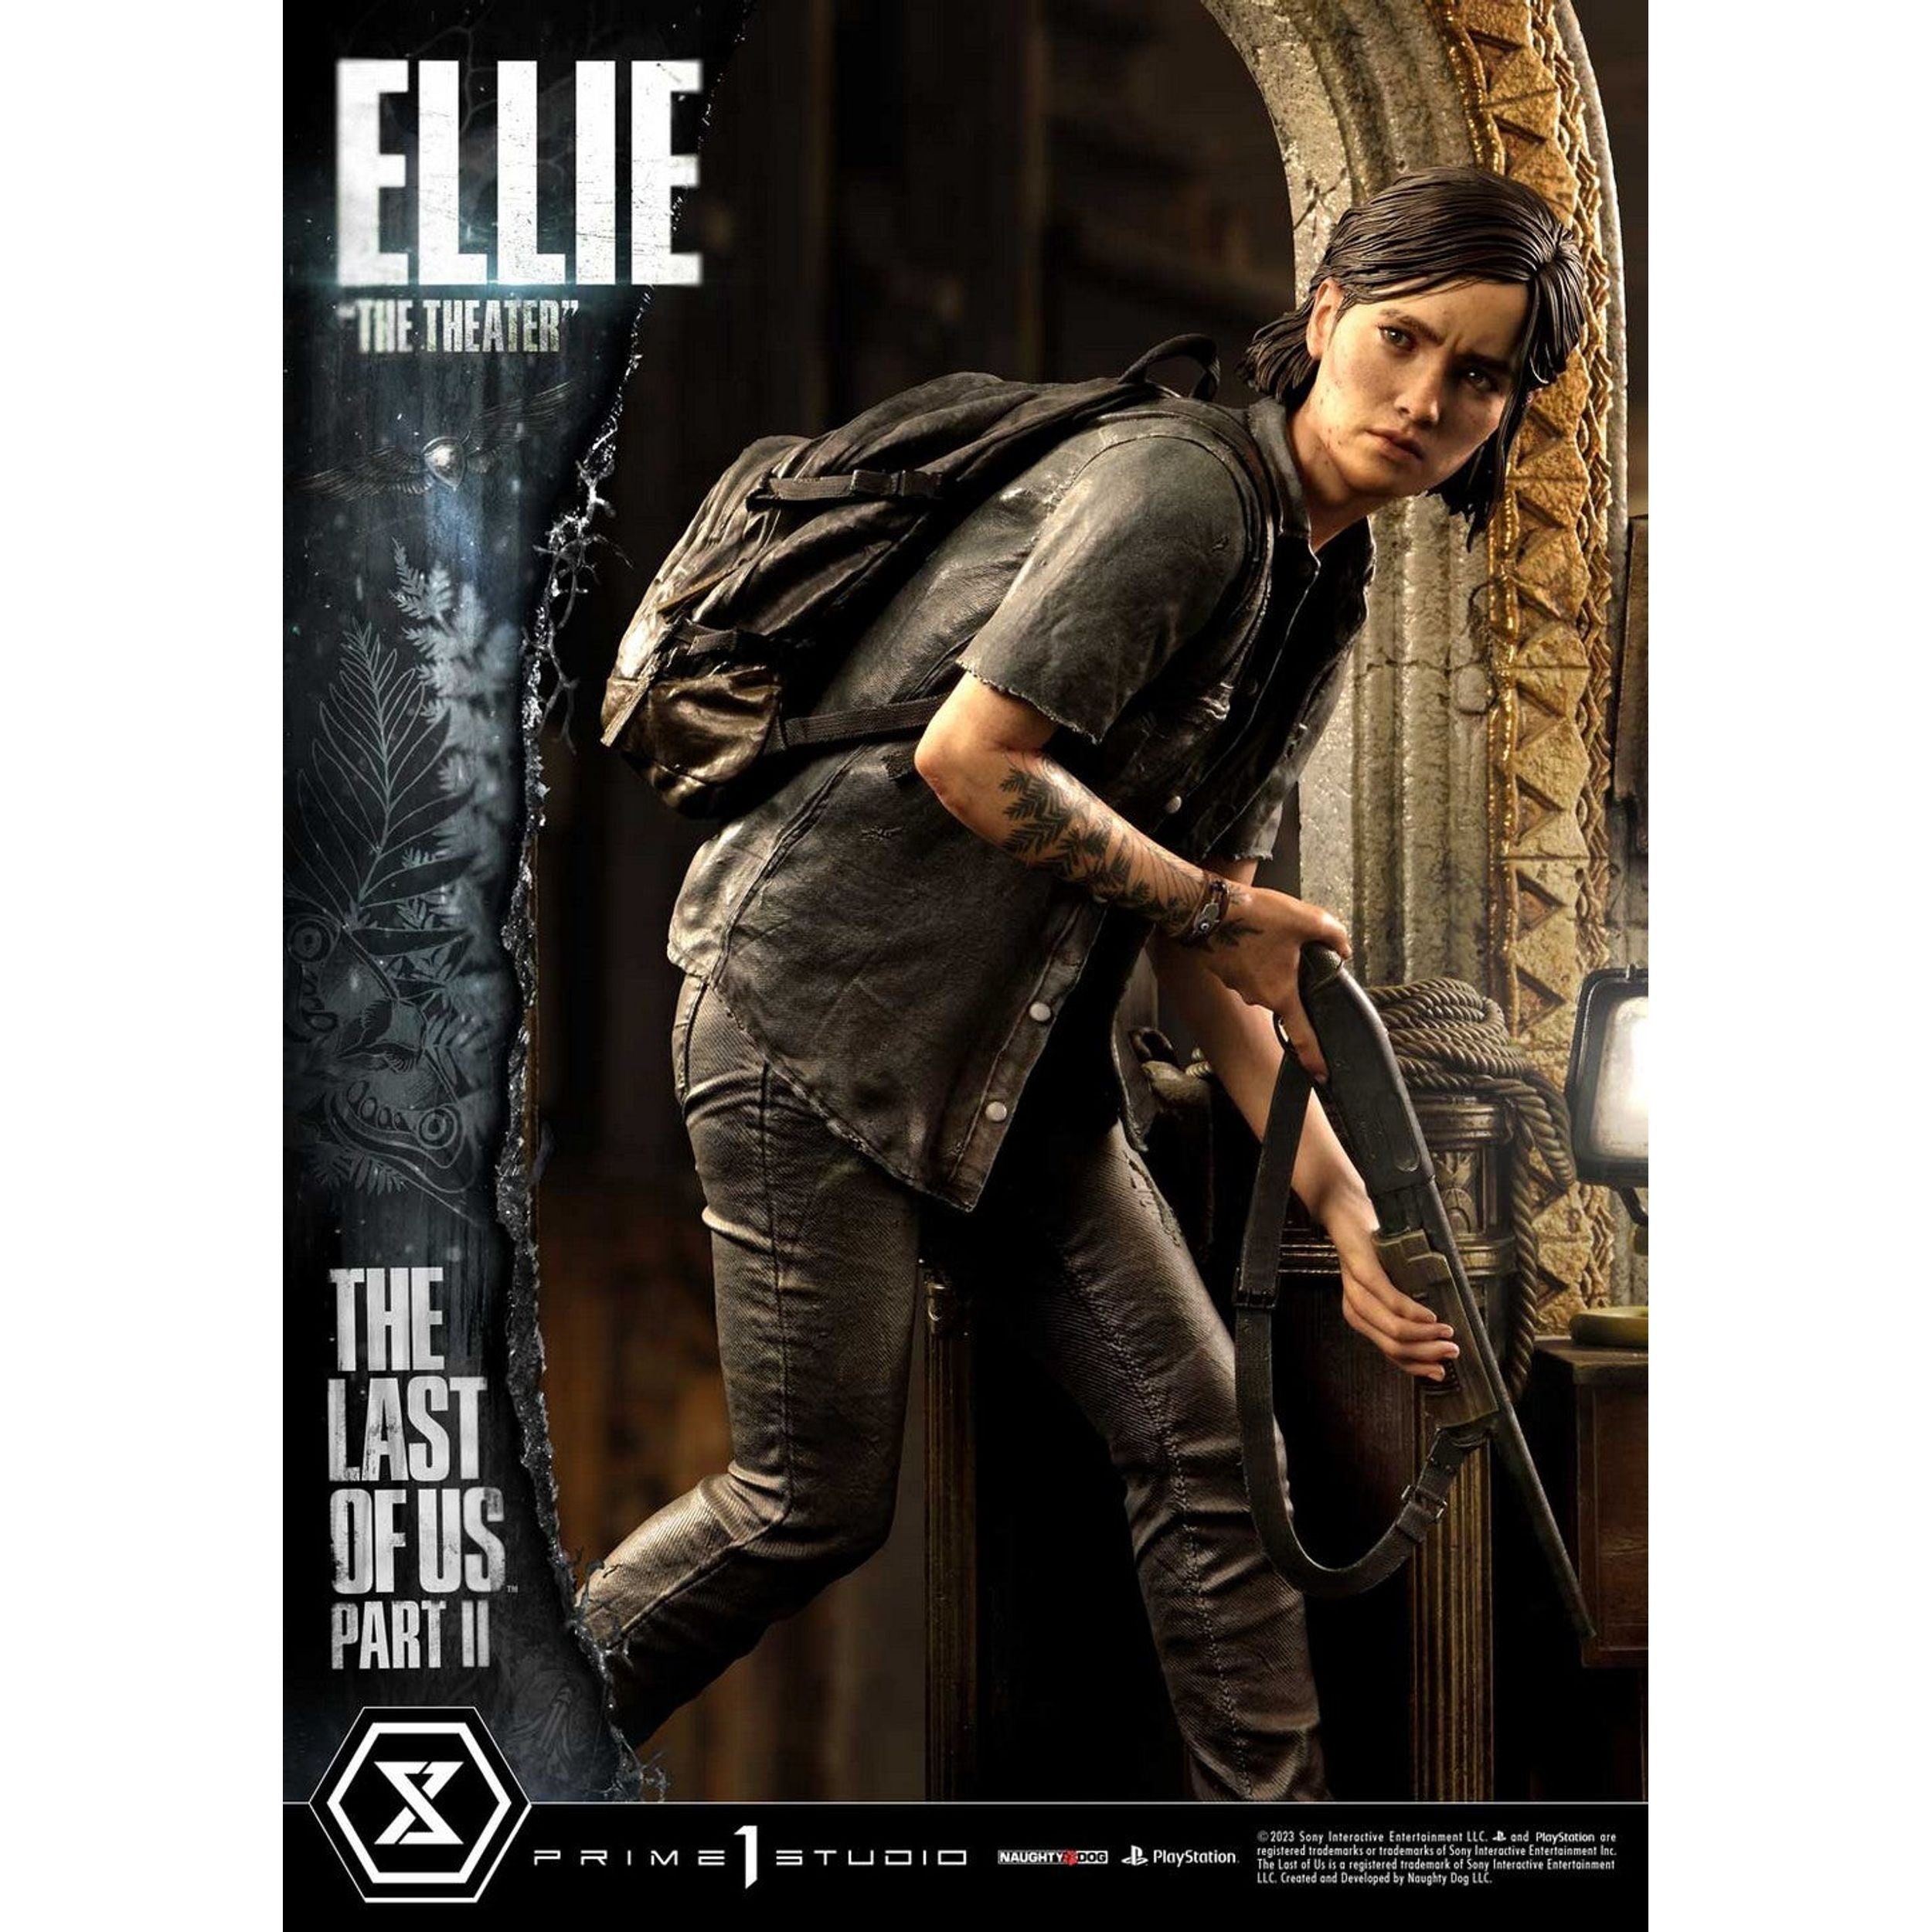 BACKPACK Video Game Prop Replica Only Ellie Edition The Last of Us Part II  2 PS4